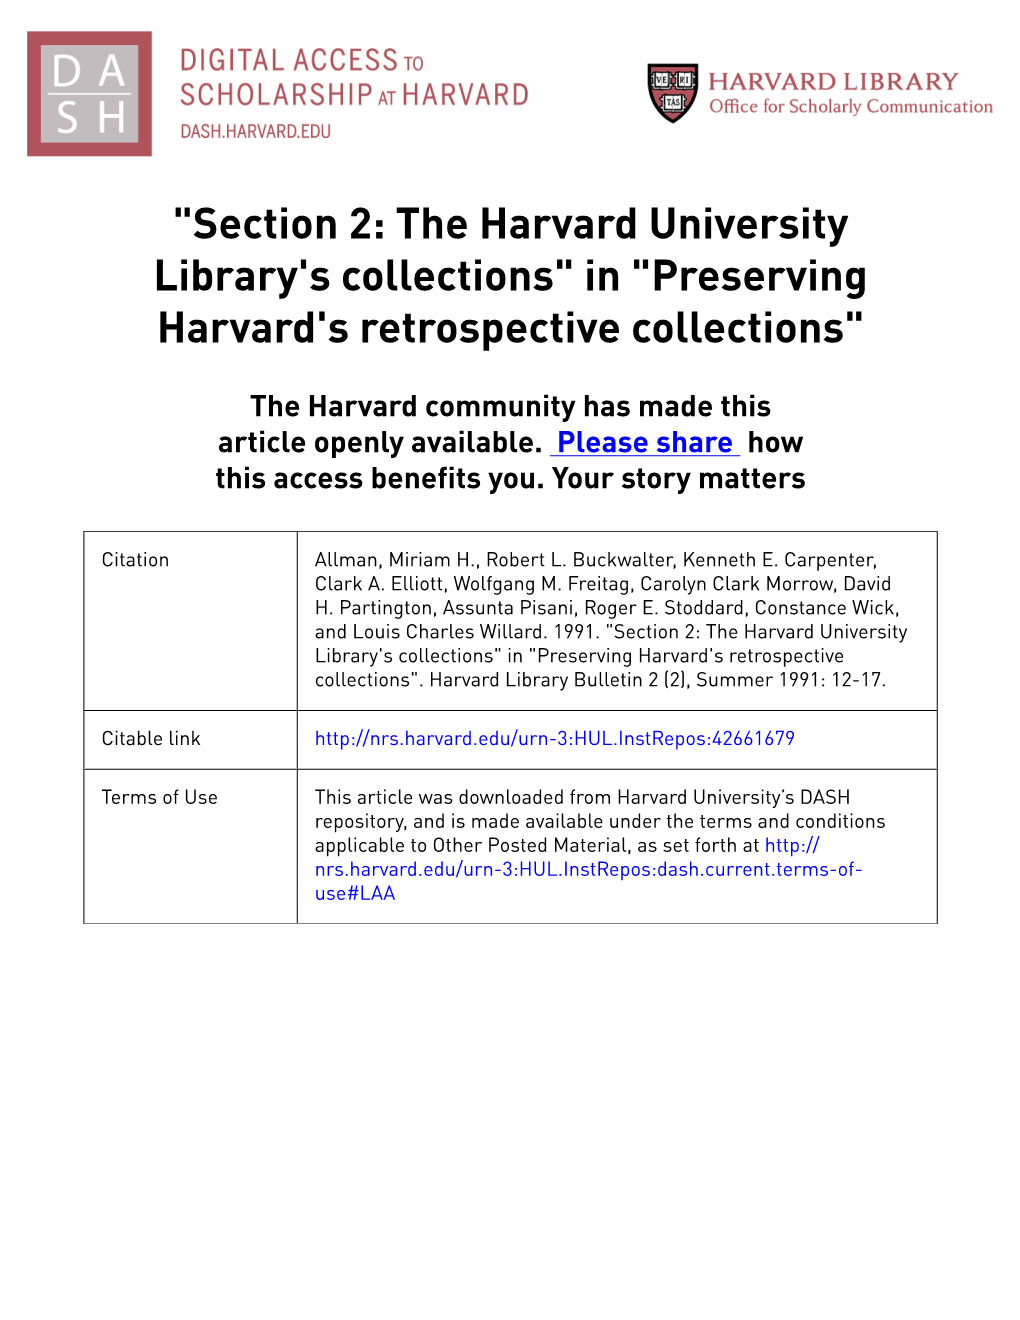 "Section 2: the Harvard University Library's Collections" in "Preserving Harvard's Retrospective Collections"